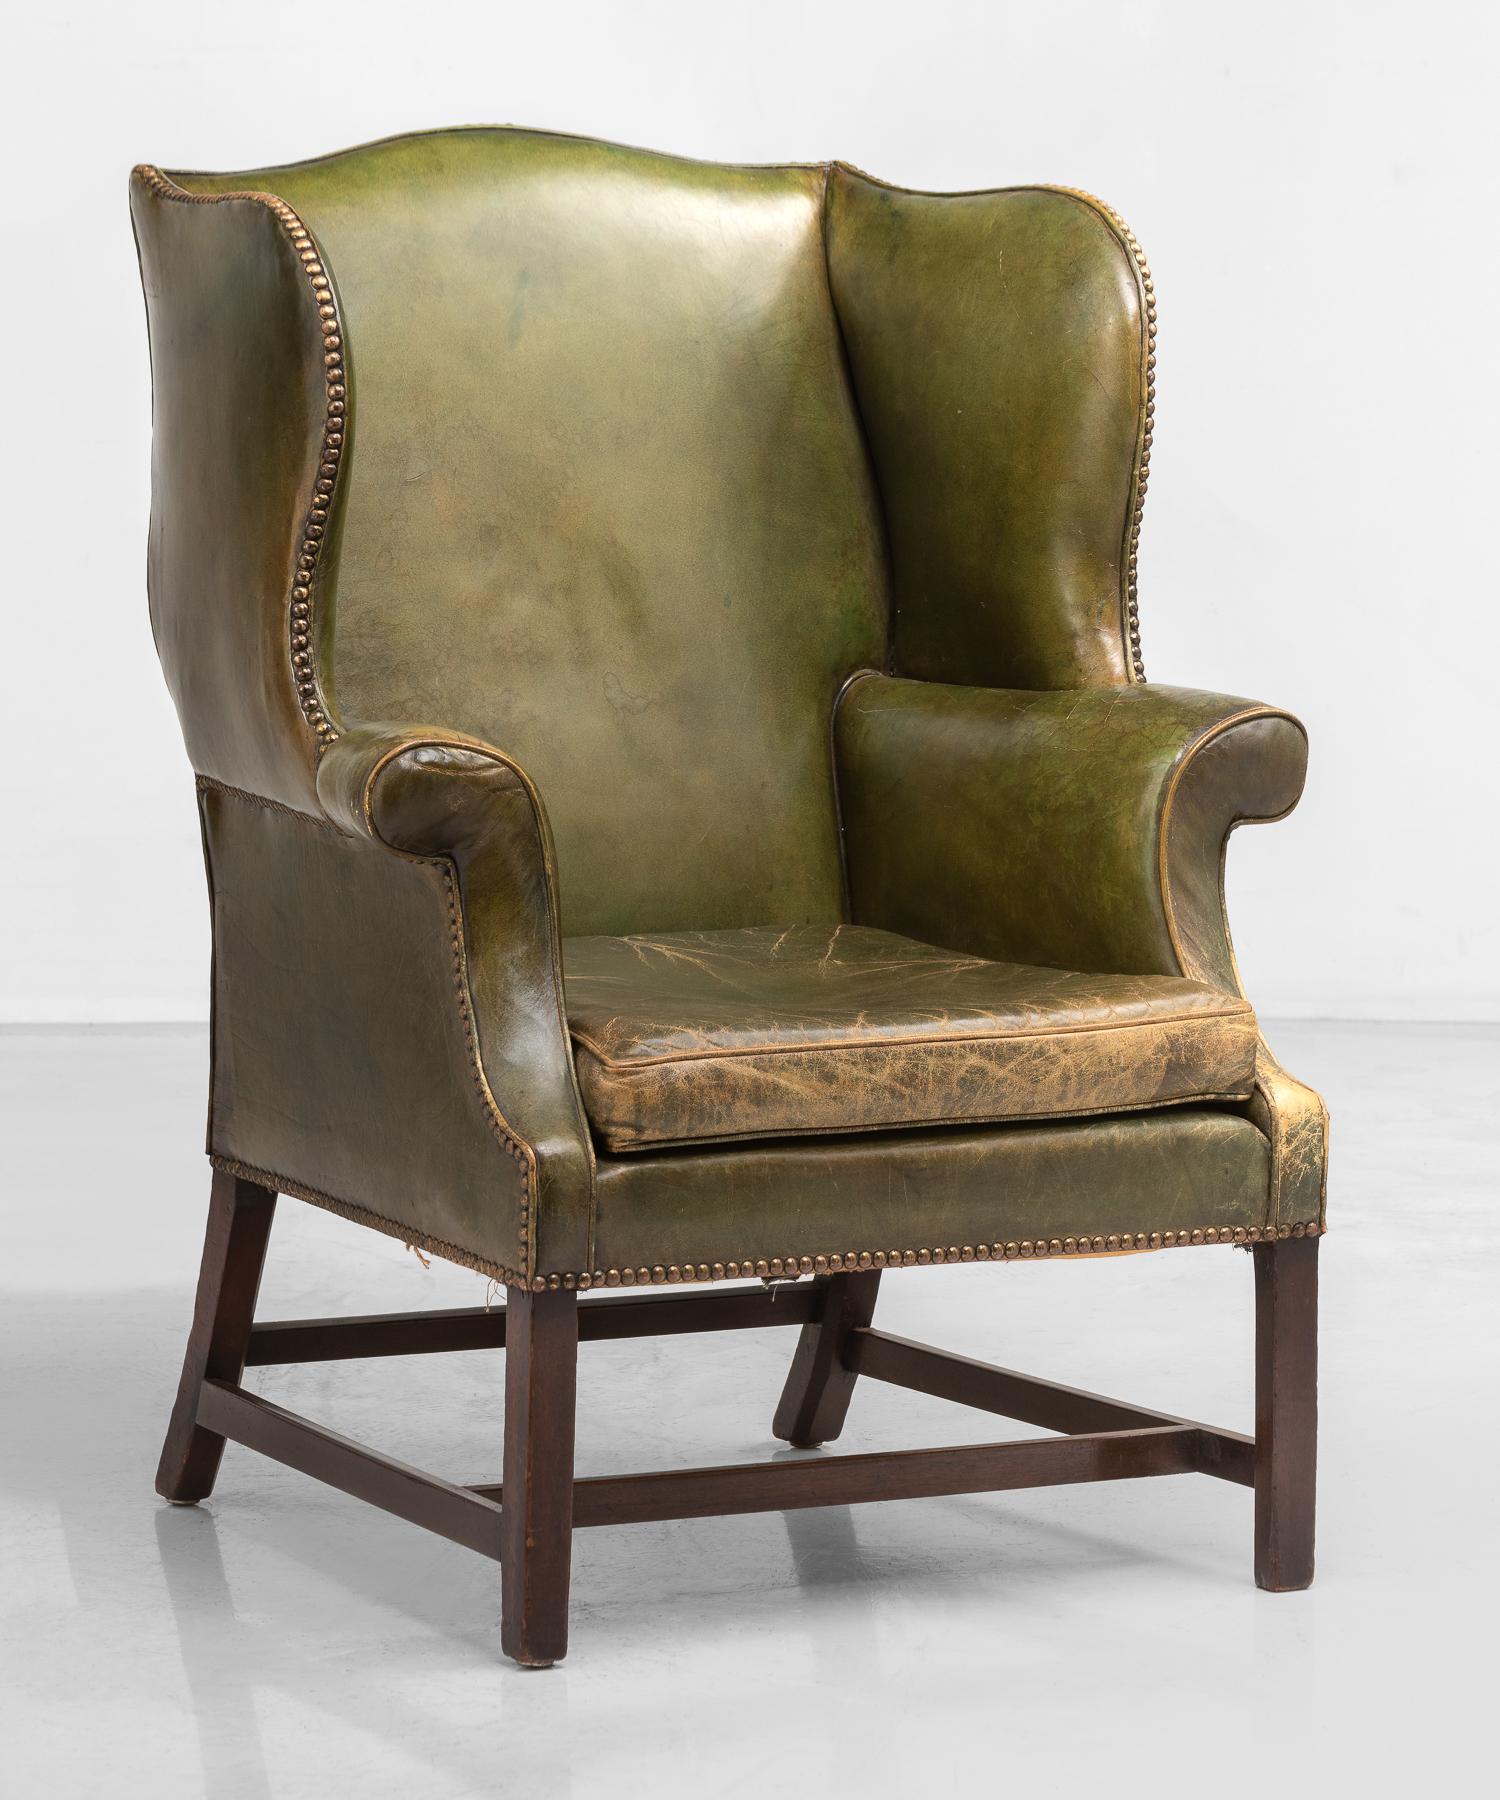 Green leather wingback chair, England, circa 1920

Generously sized form in a beautiful, patinated green leather, which includes studded details.